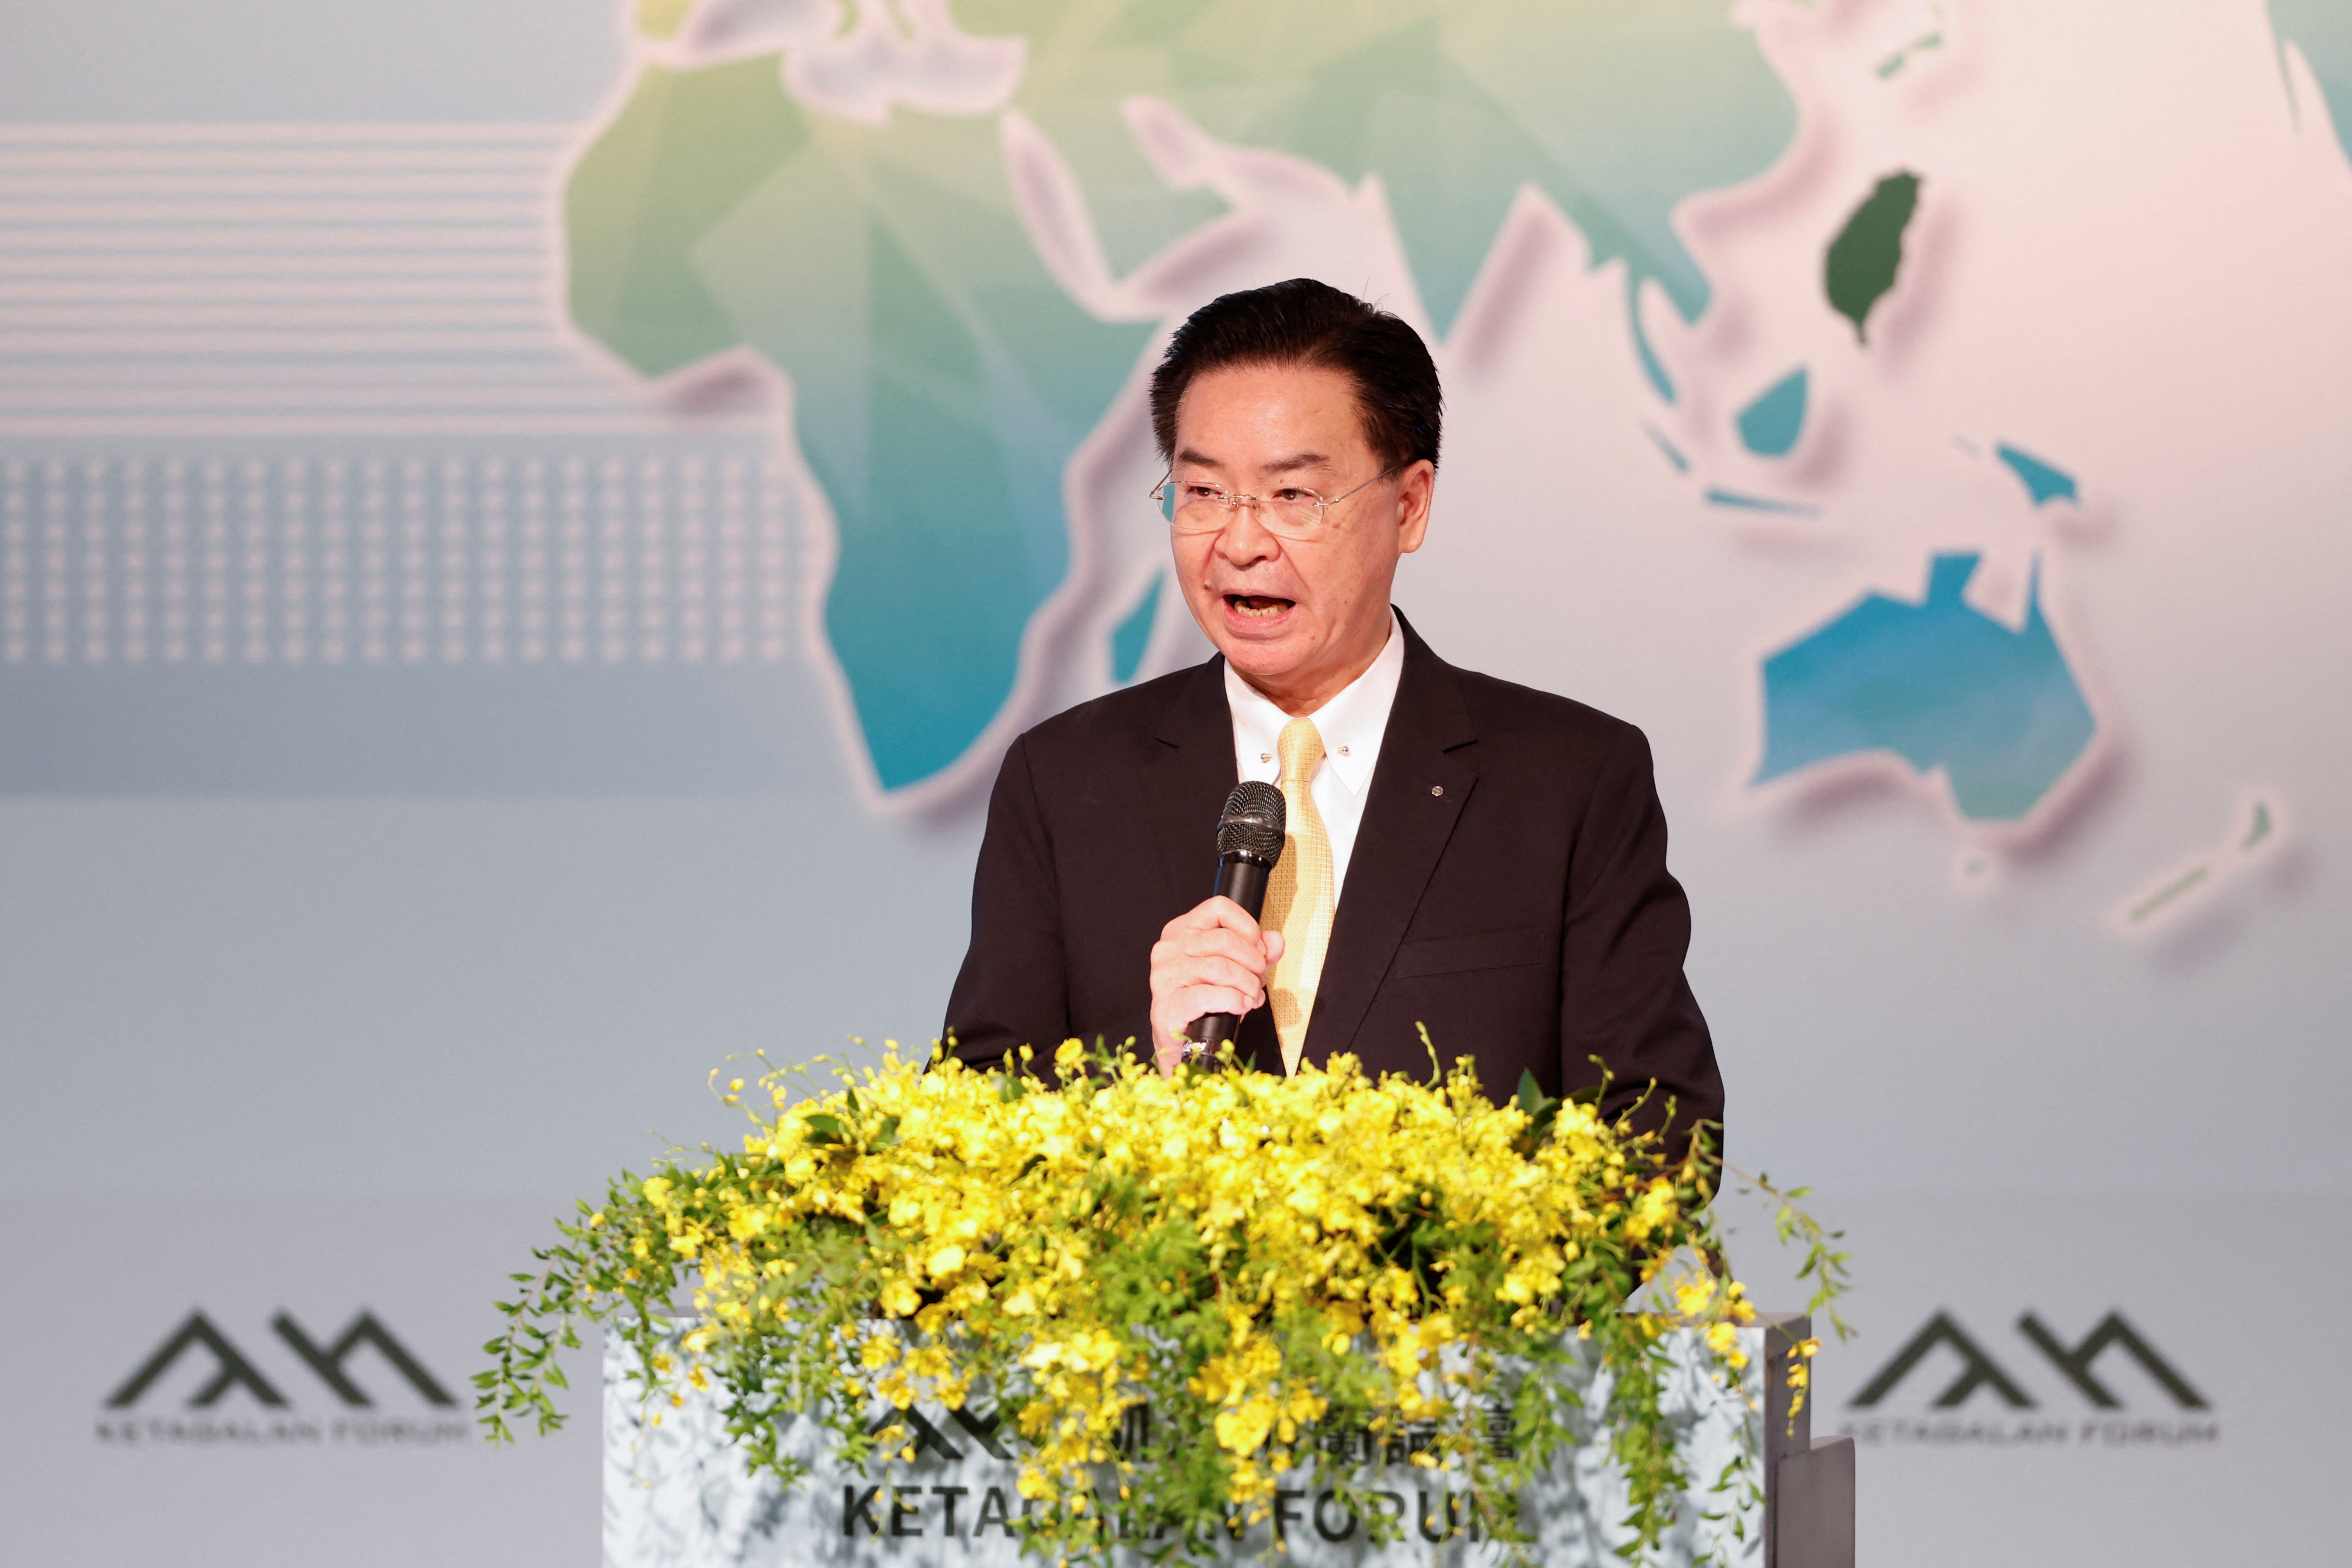 Taiwan's Foreign Minister Joseph Wu speaks during the Ketagalan forum in Taipei